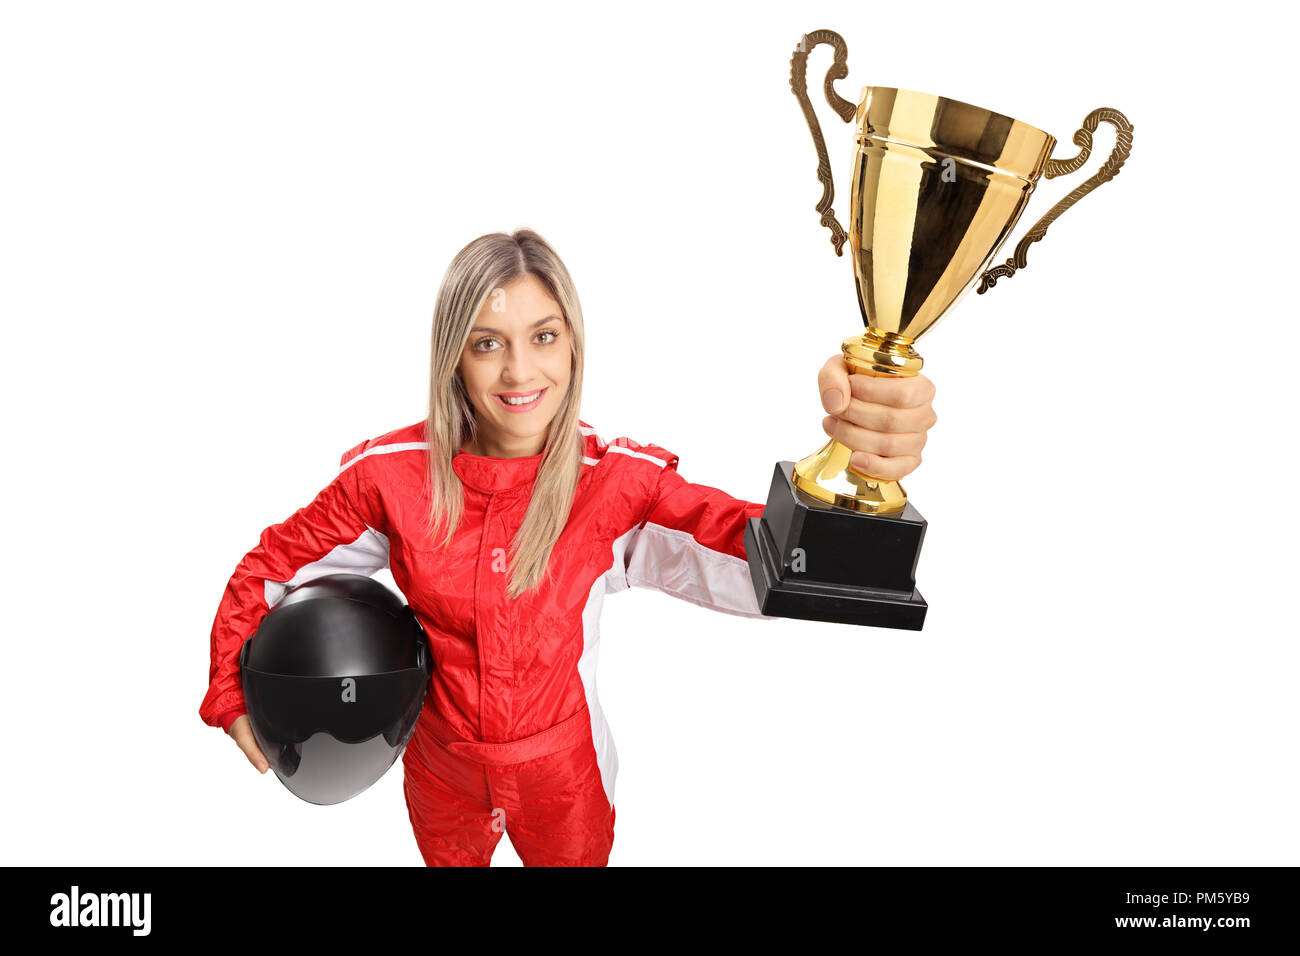 Woman racer in a suit holding a gold trophy cup isolated on white background Stock Photo